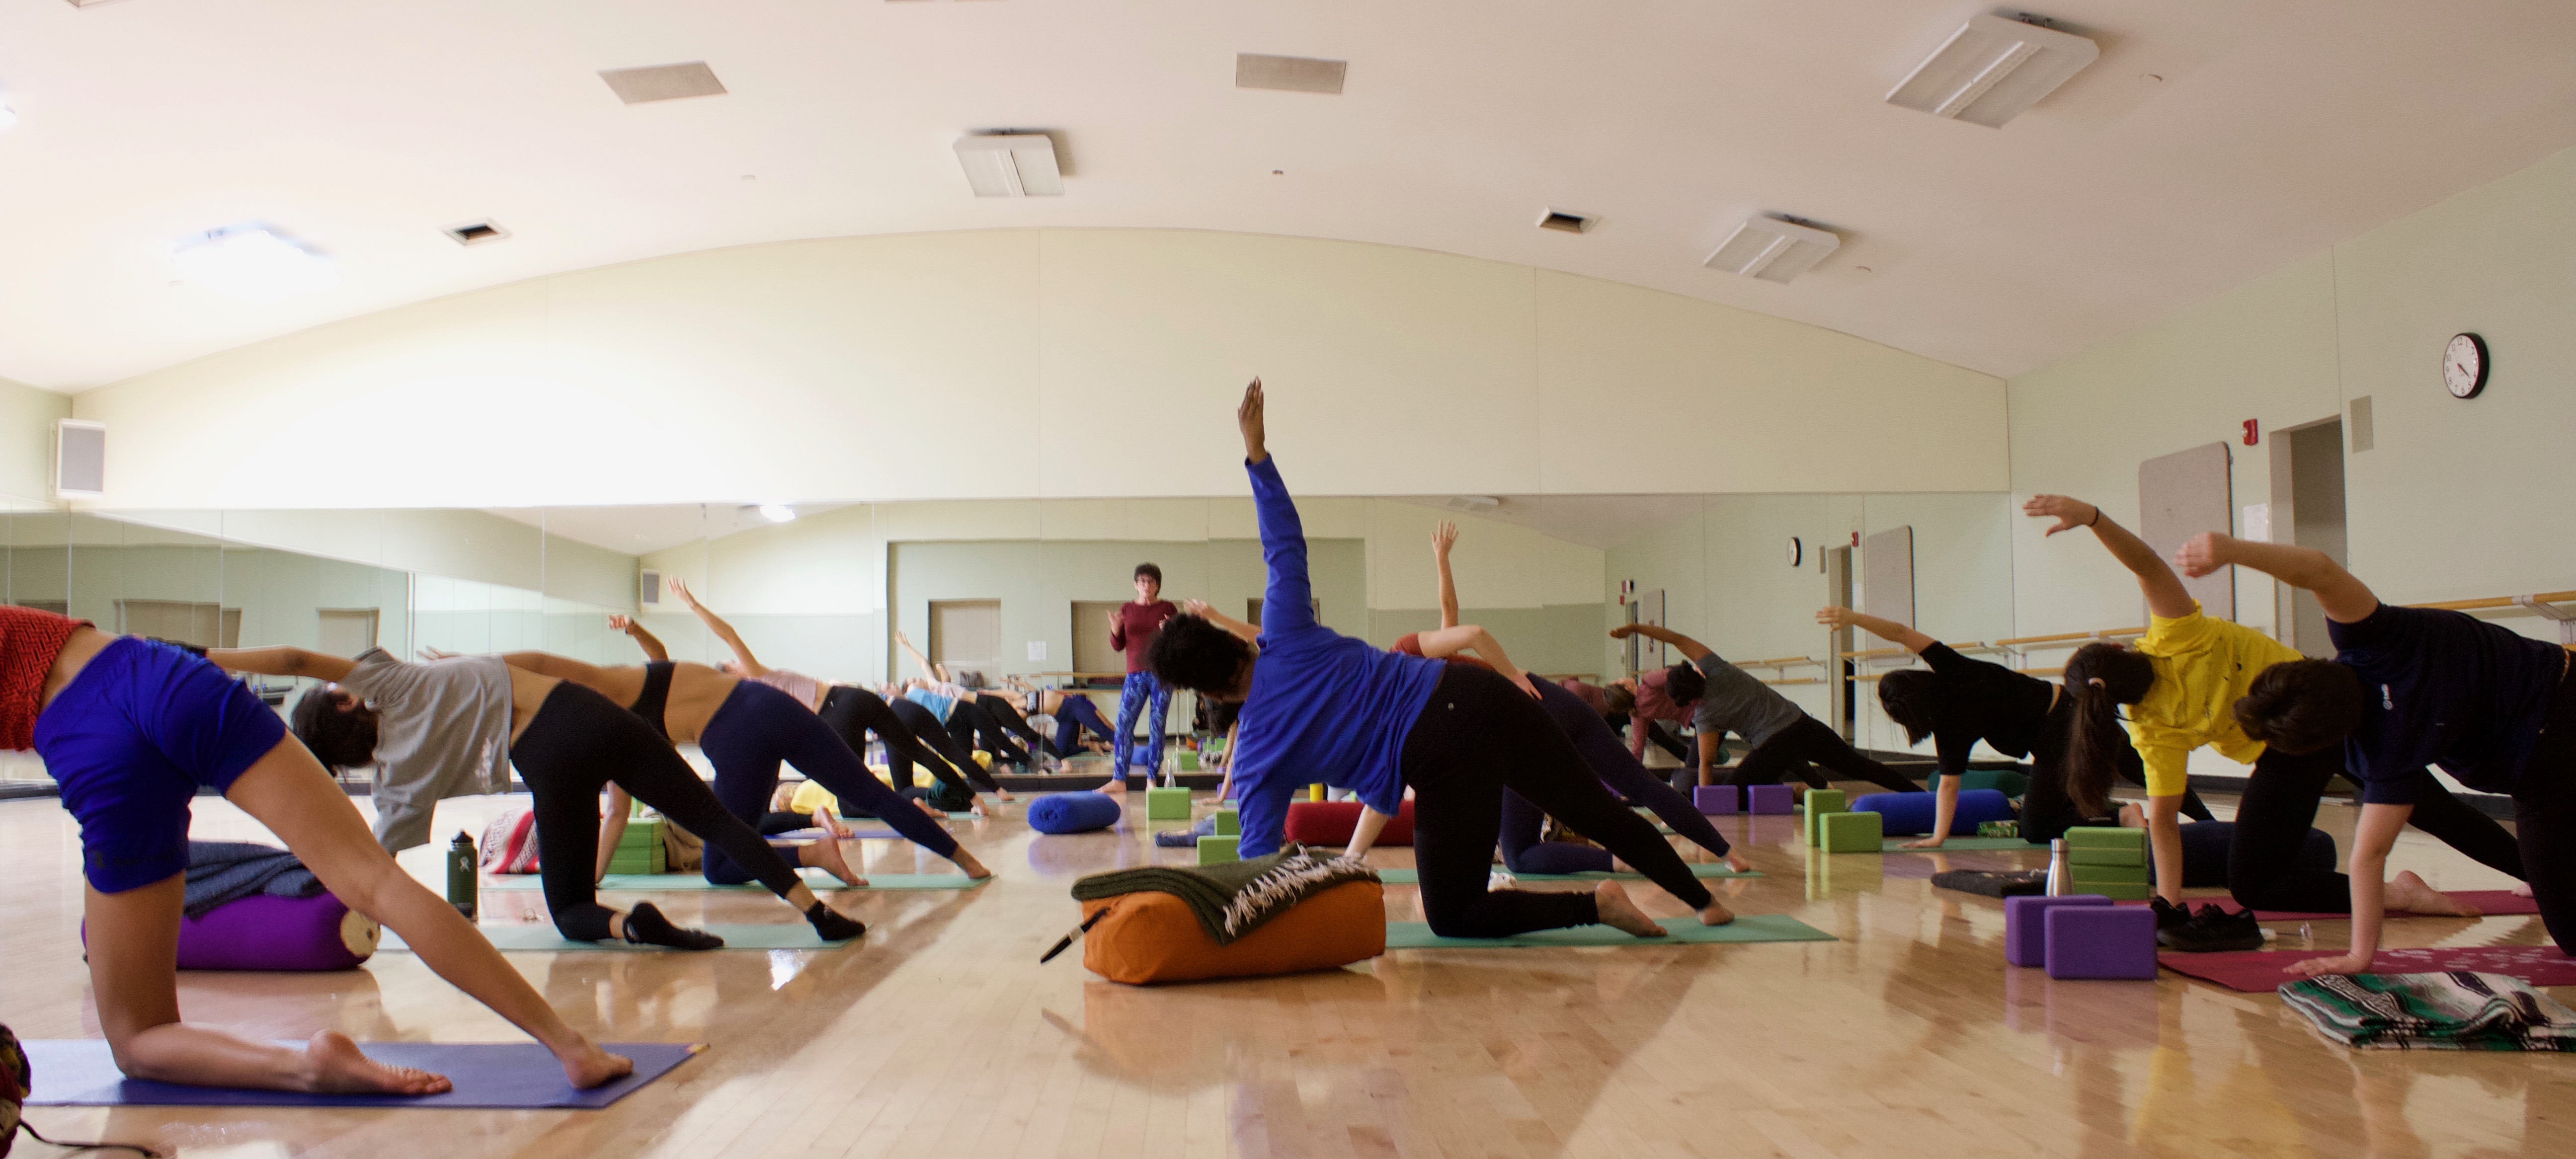 students stretching during a yoga class